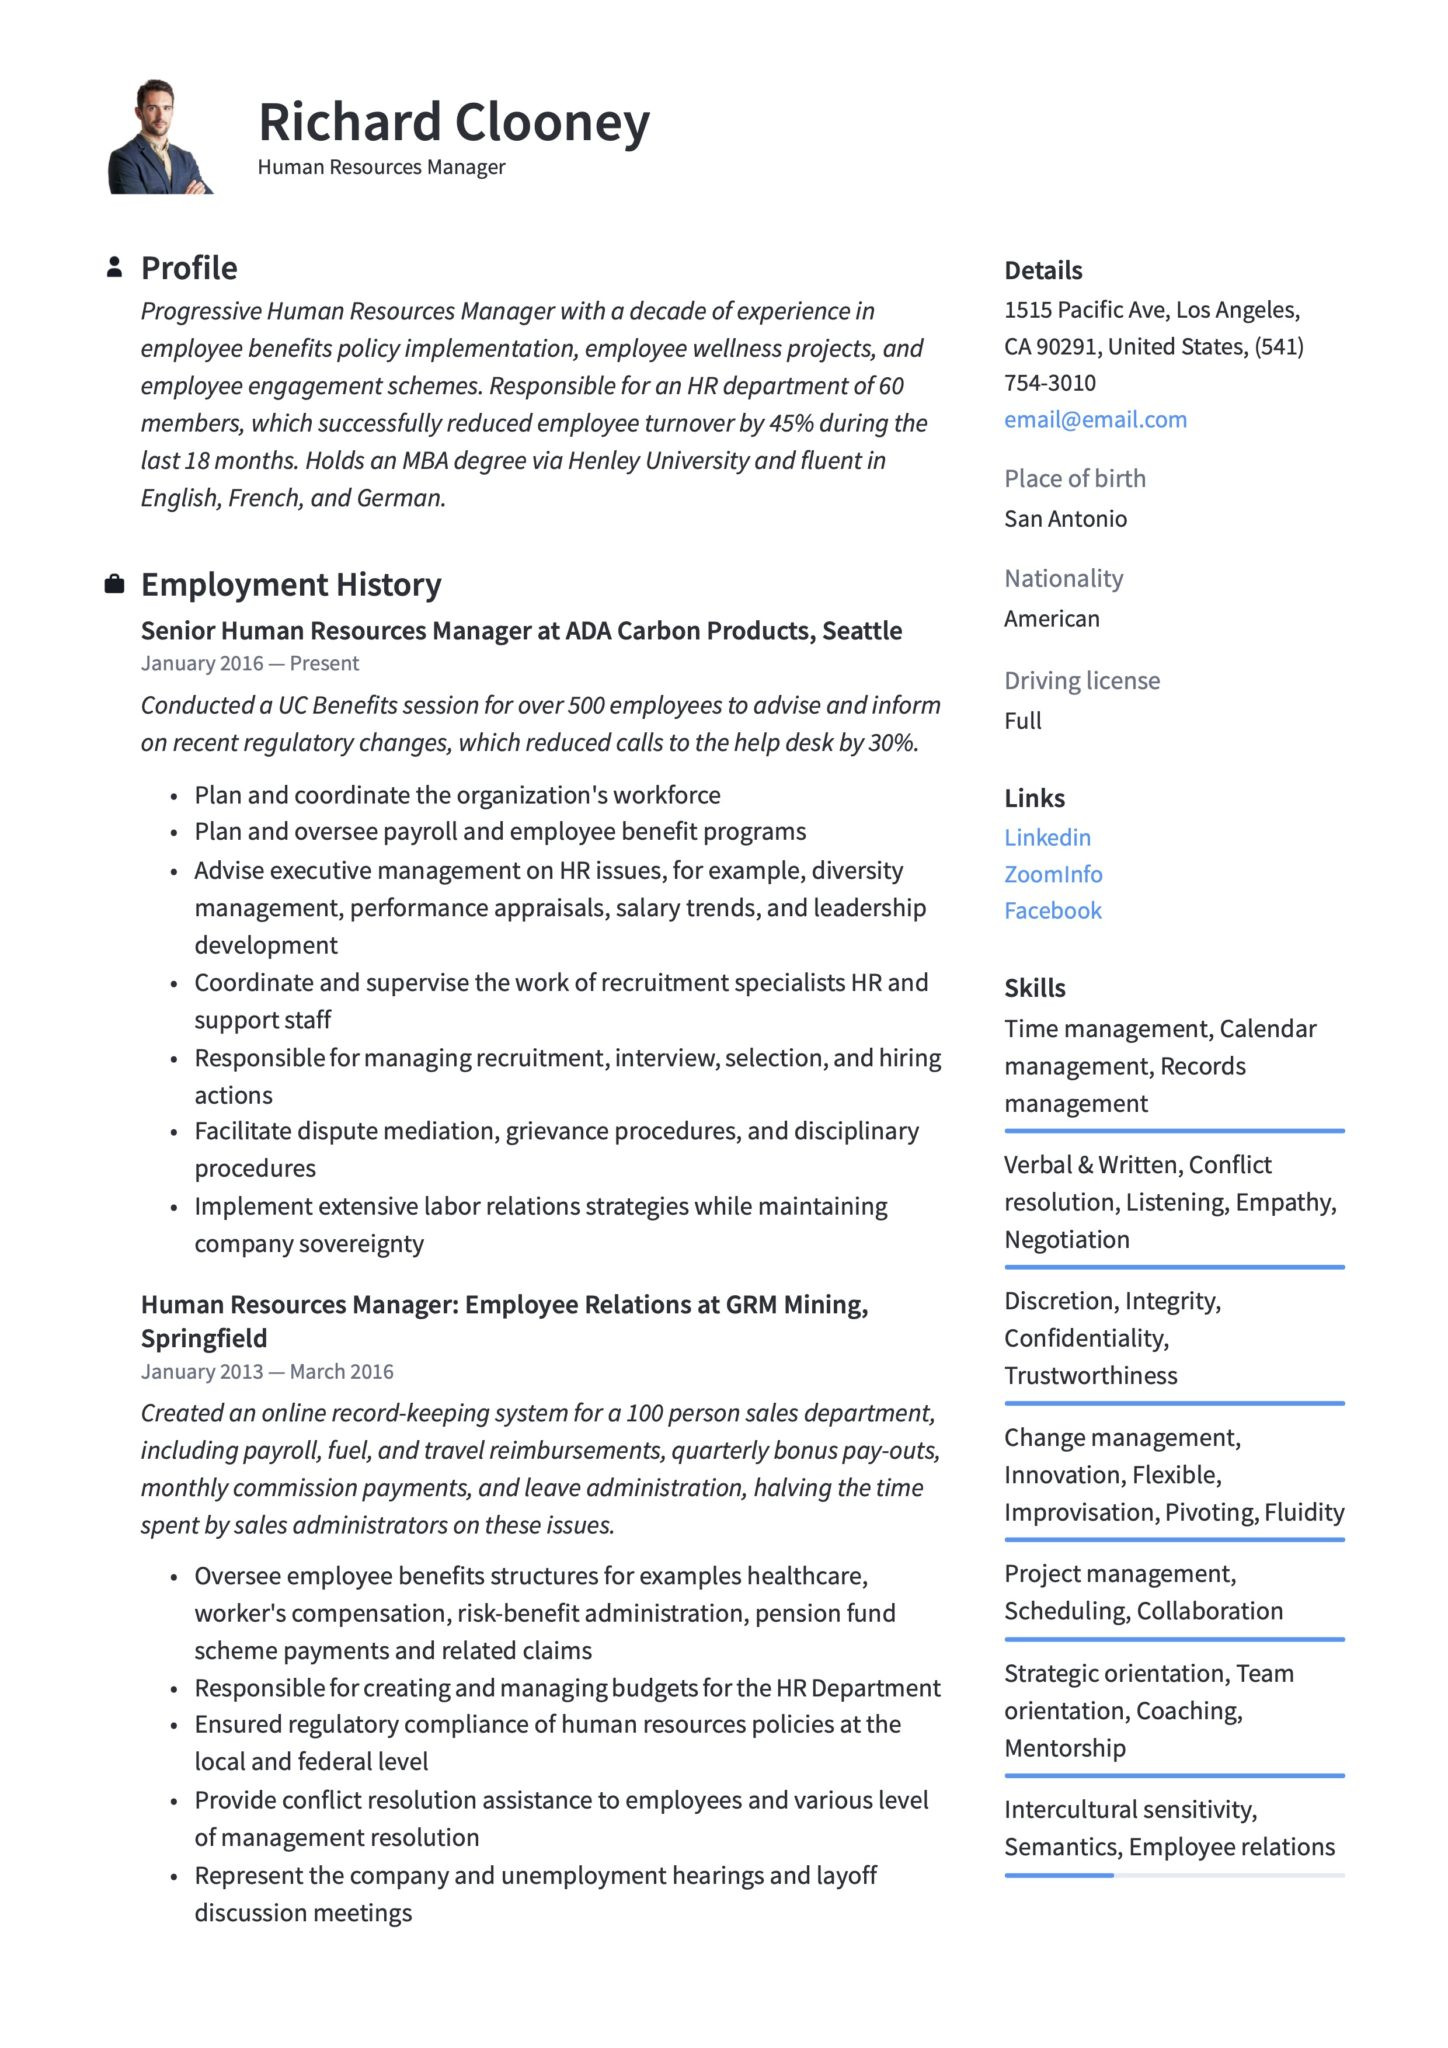 Free Sample Resume for Human Resources Manager 17 Human Resources Manager Resumes & Guide 2020